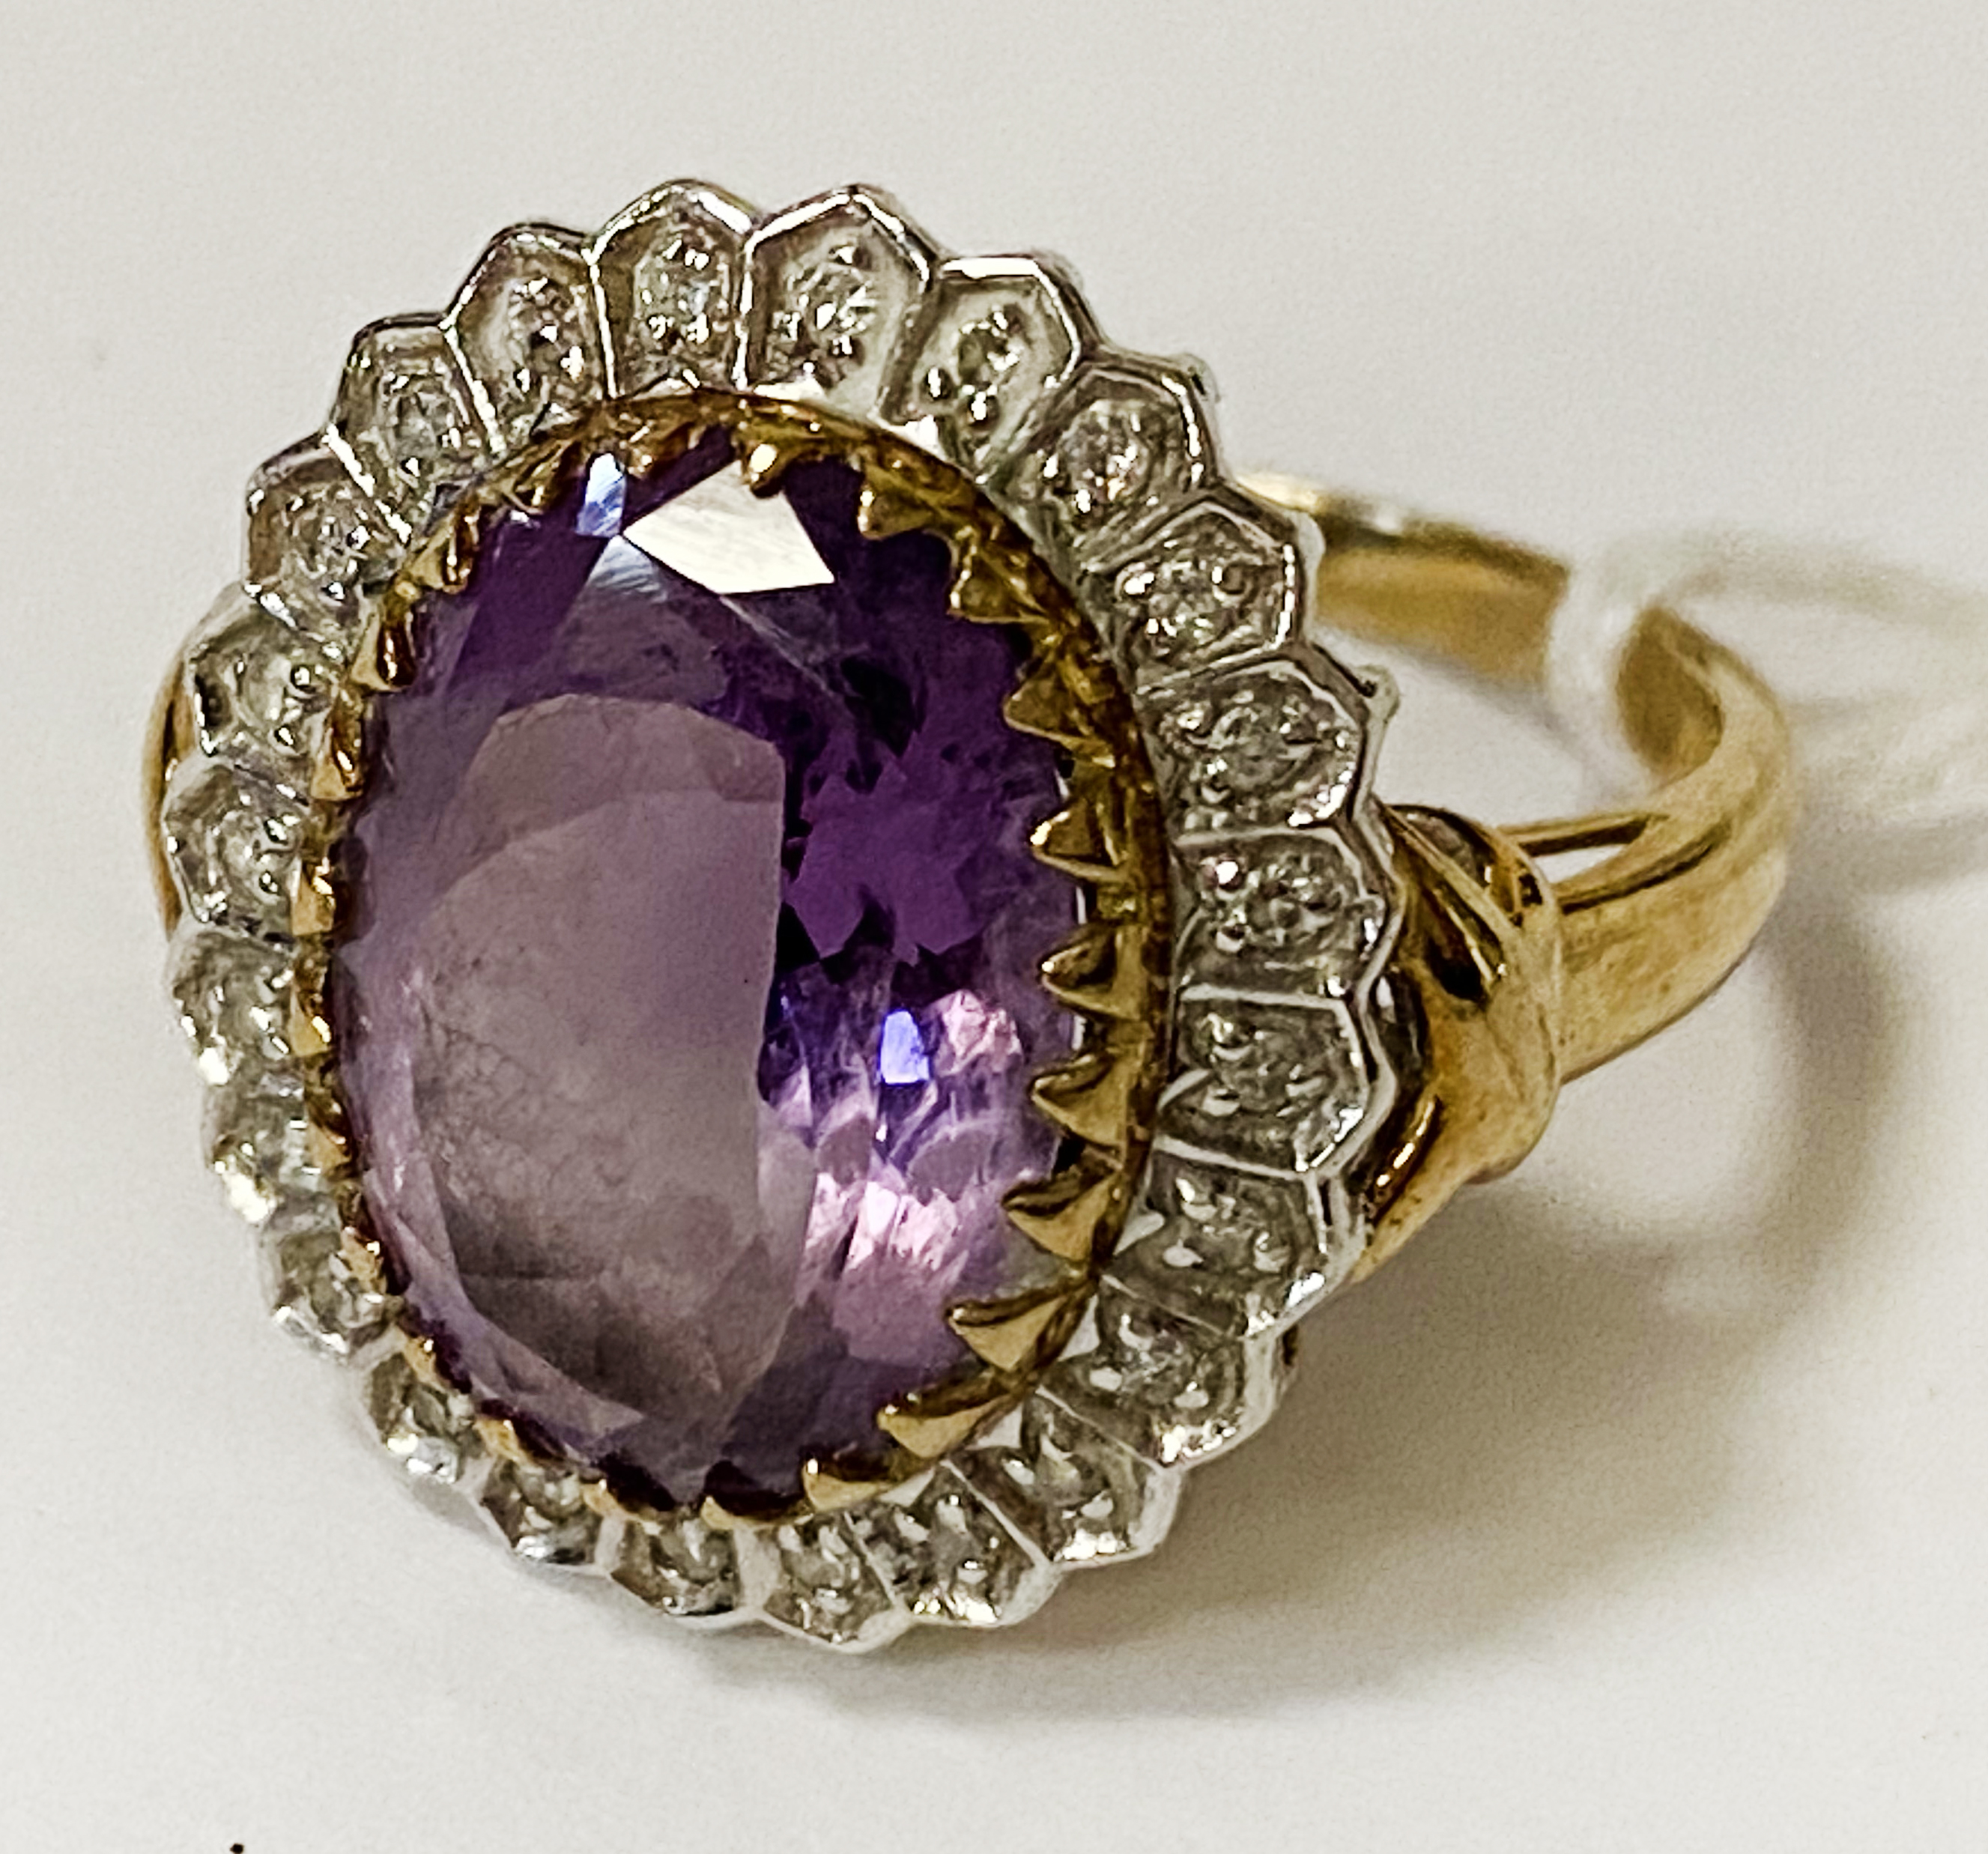 9CT GOLD OVAL AMETHYST RING WITH DIAMOND HALO SIZE N